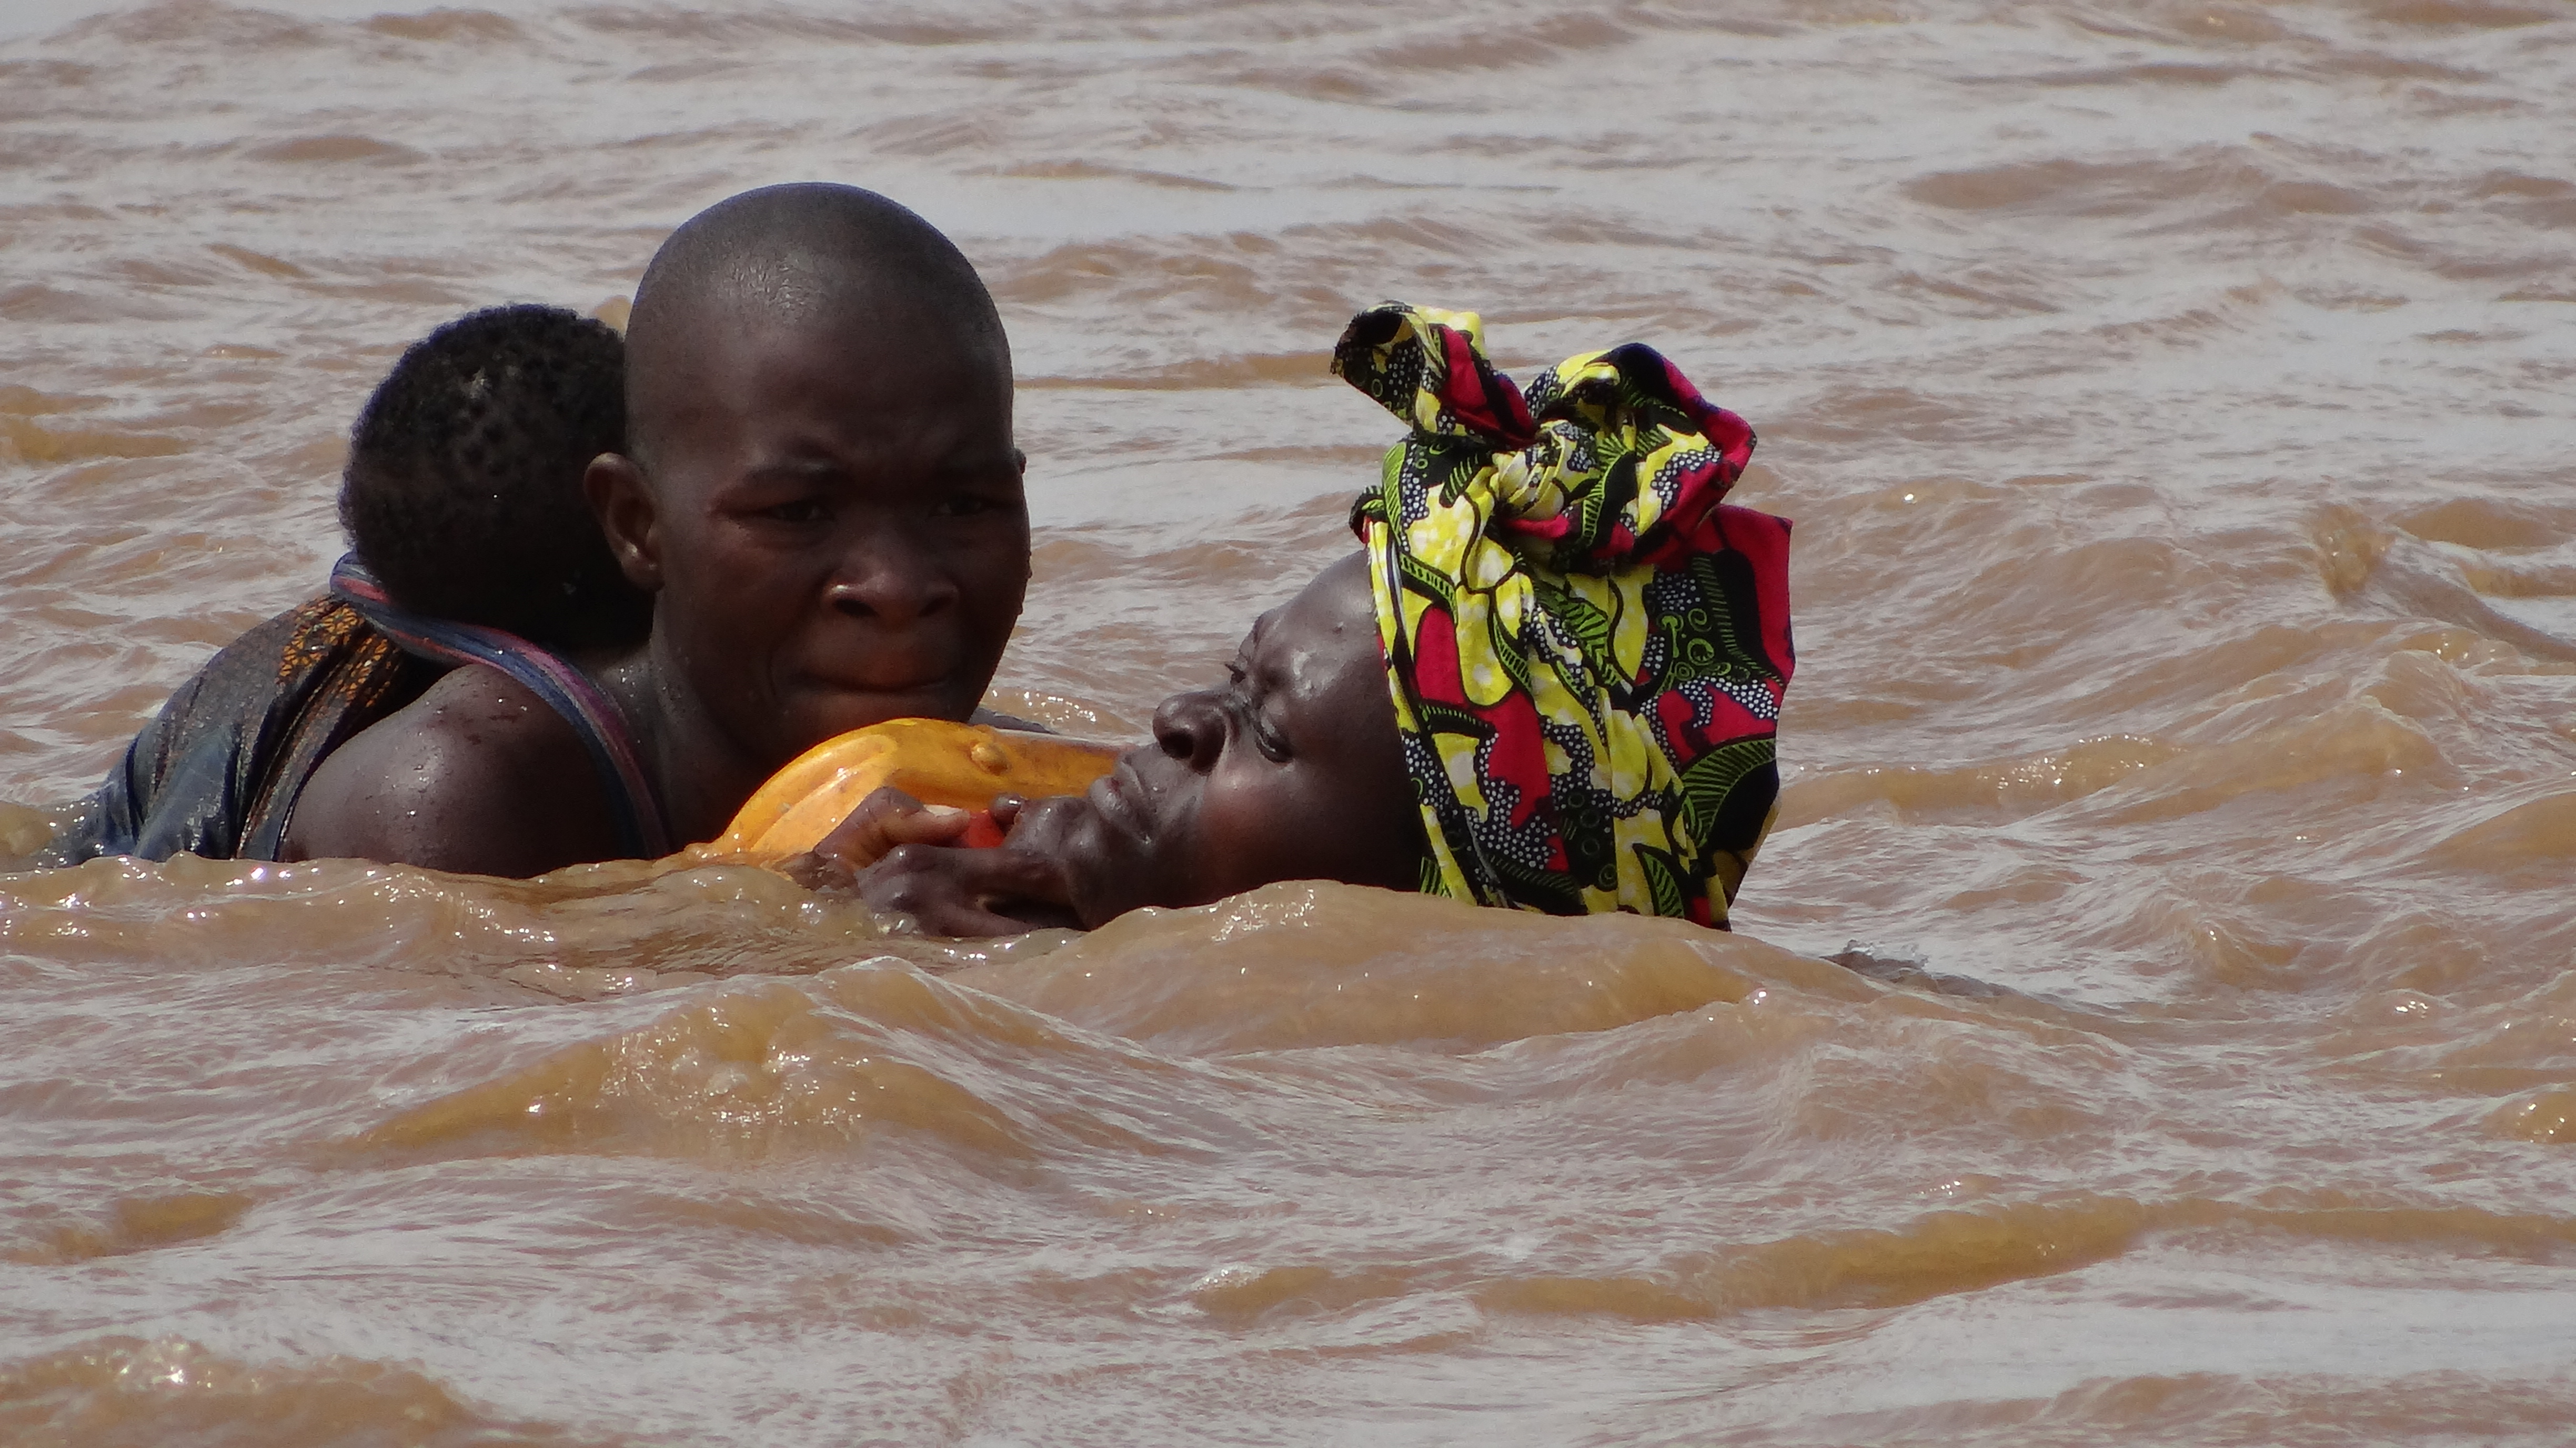 Congolese refugees defy strong currents in crocodile-infested river to seek safety in Burundi